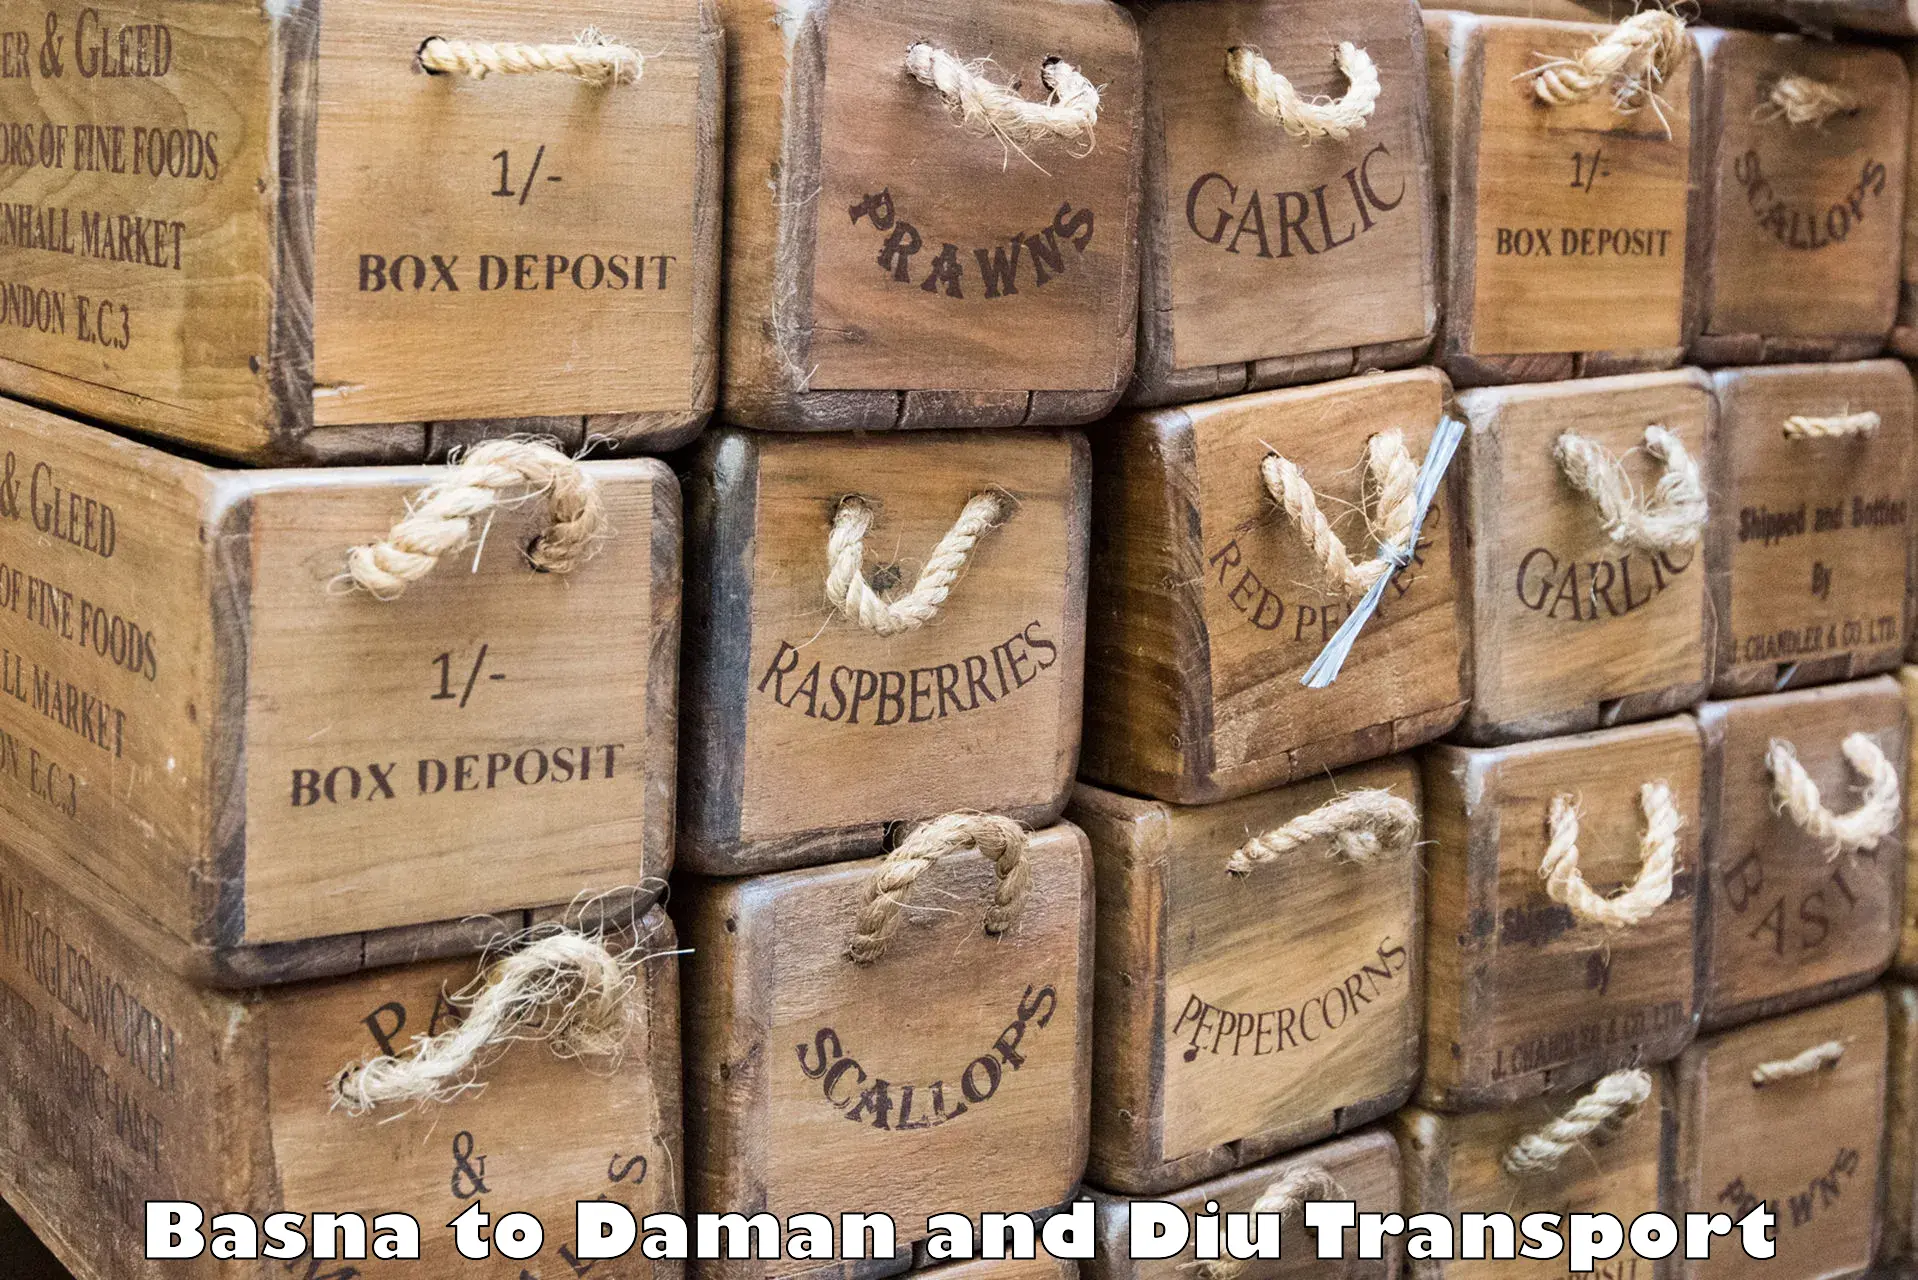 Air freight transport services Basna to Daman